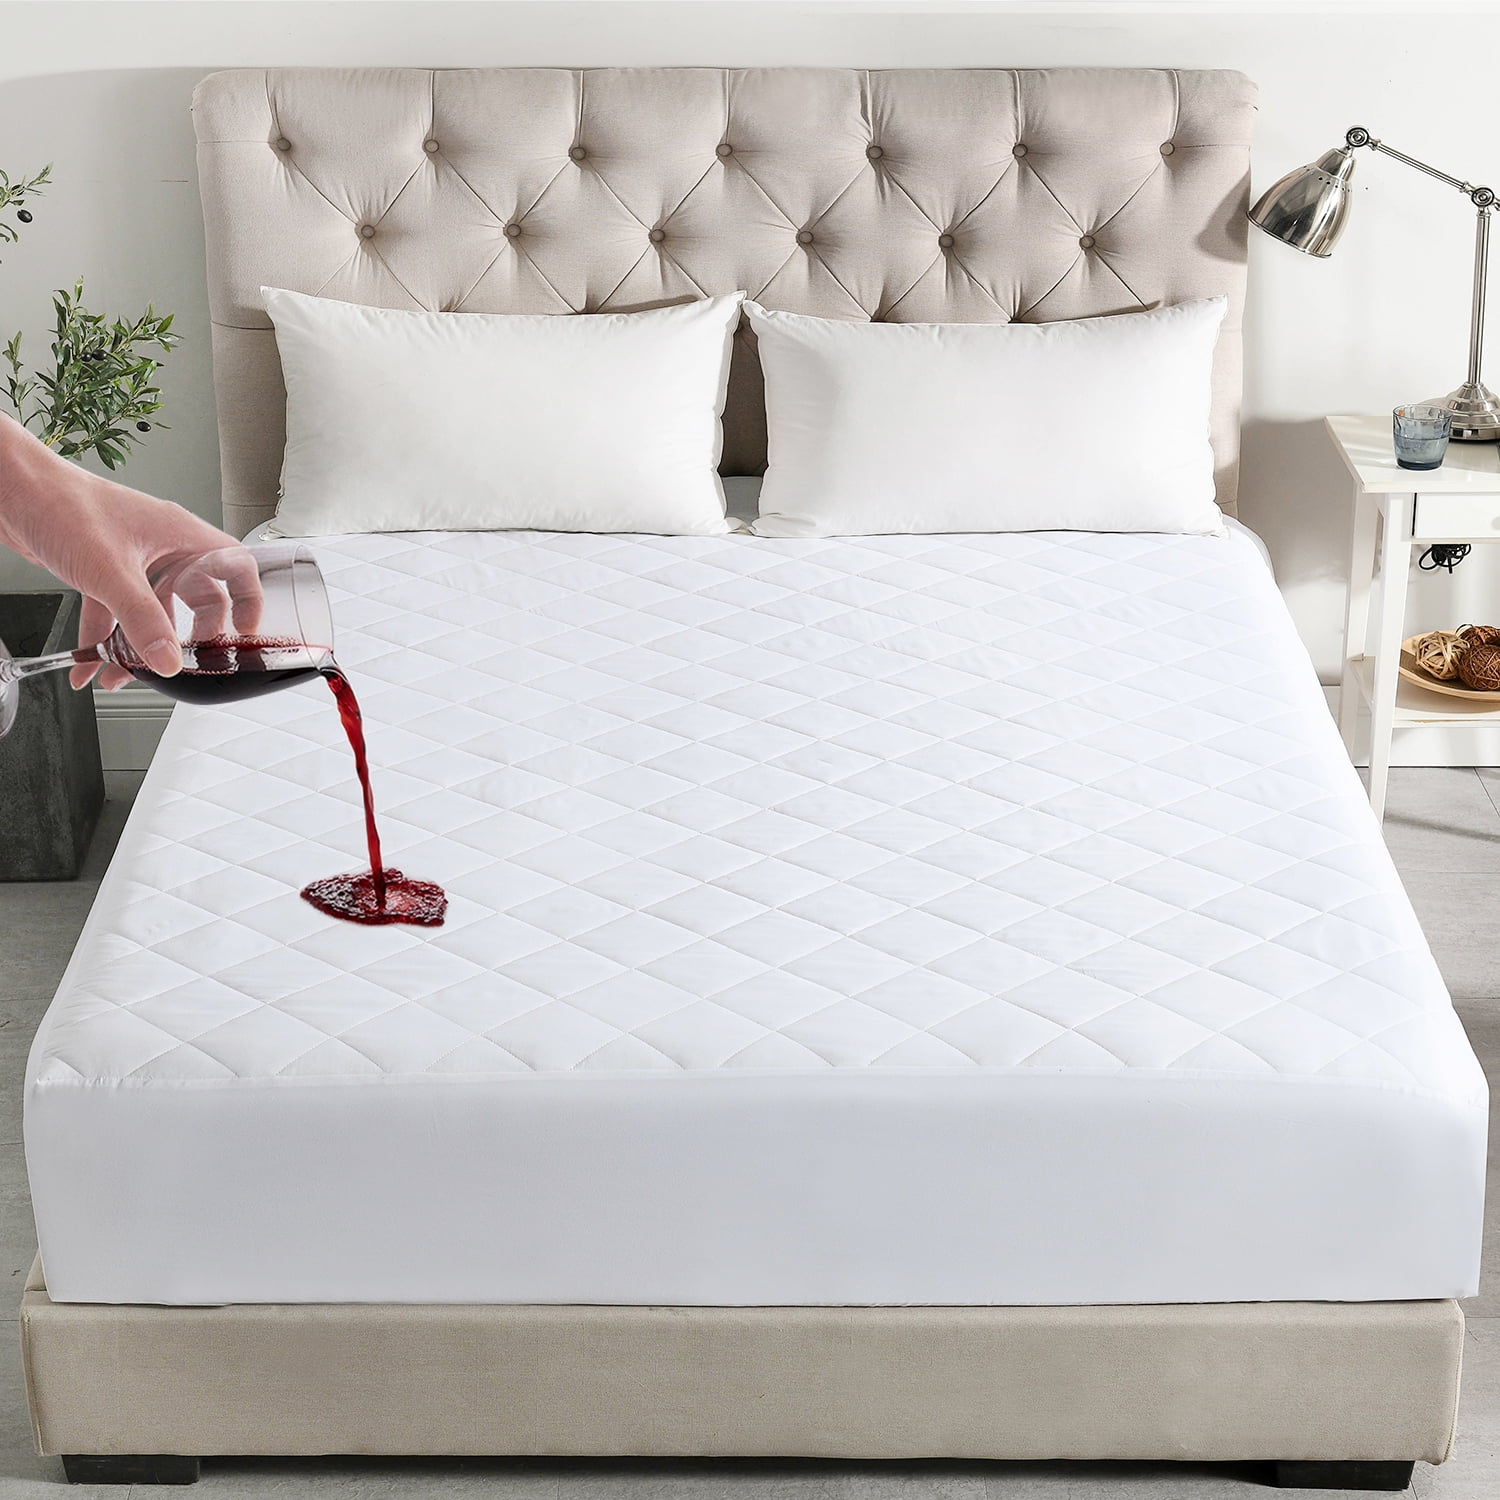 Waterproof Twin mattress protectors Defend A Bed White Fitted New Original Bag 